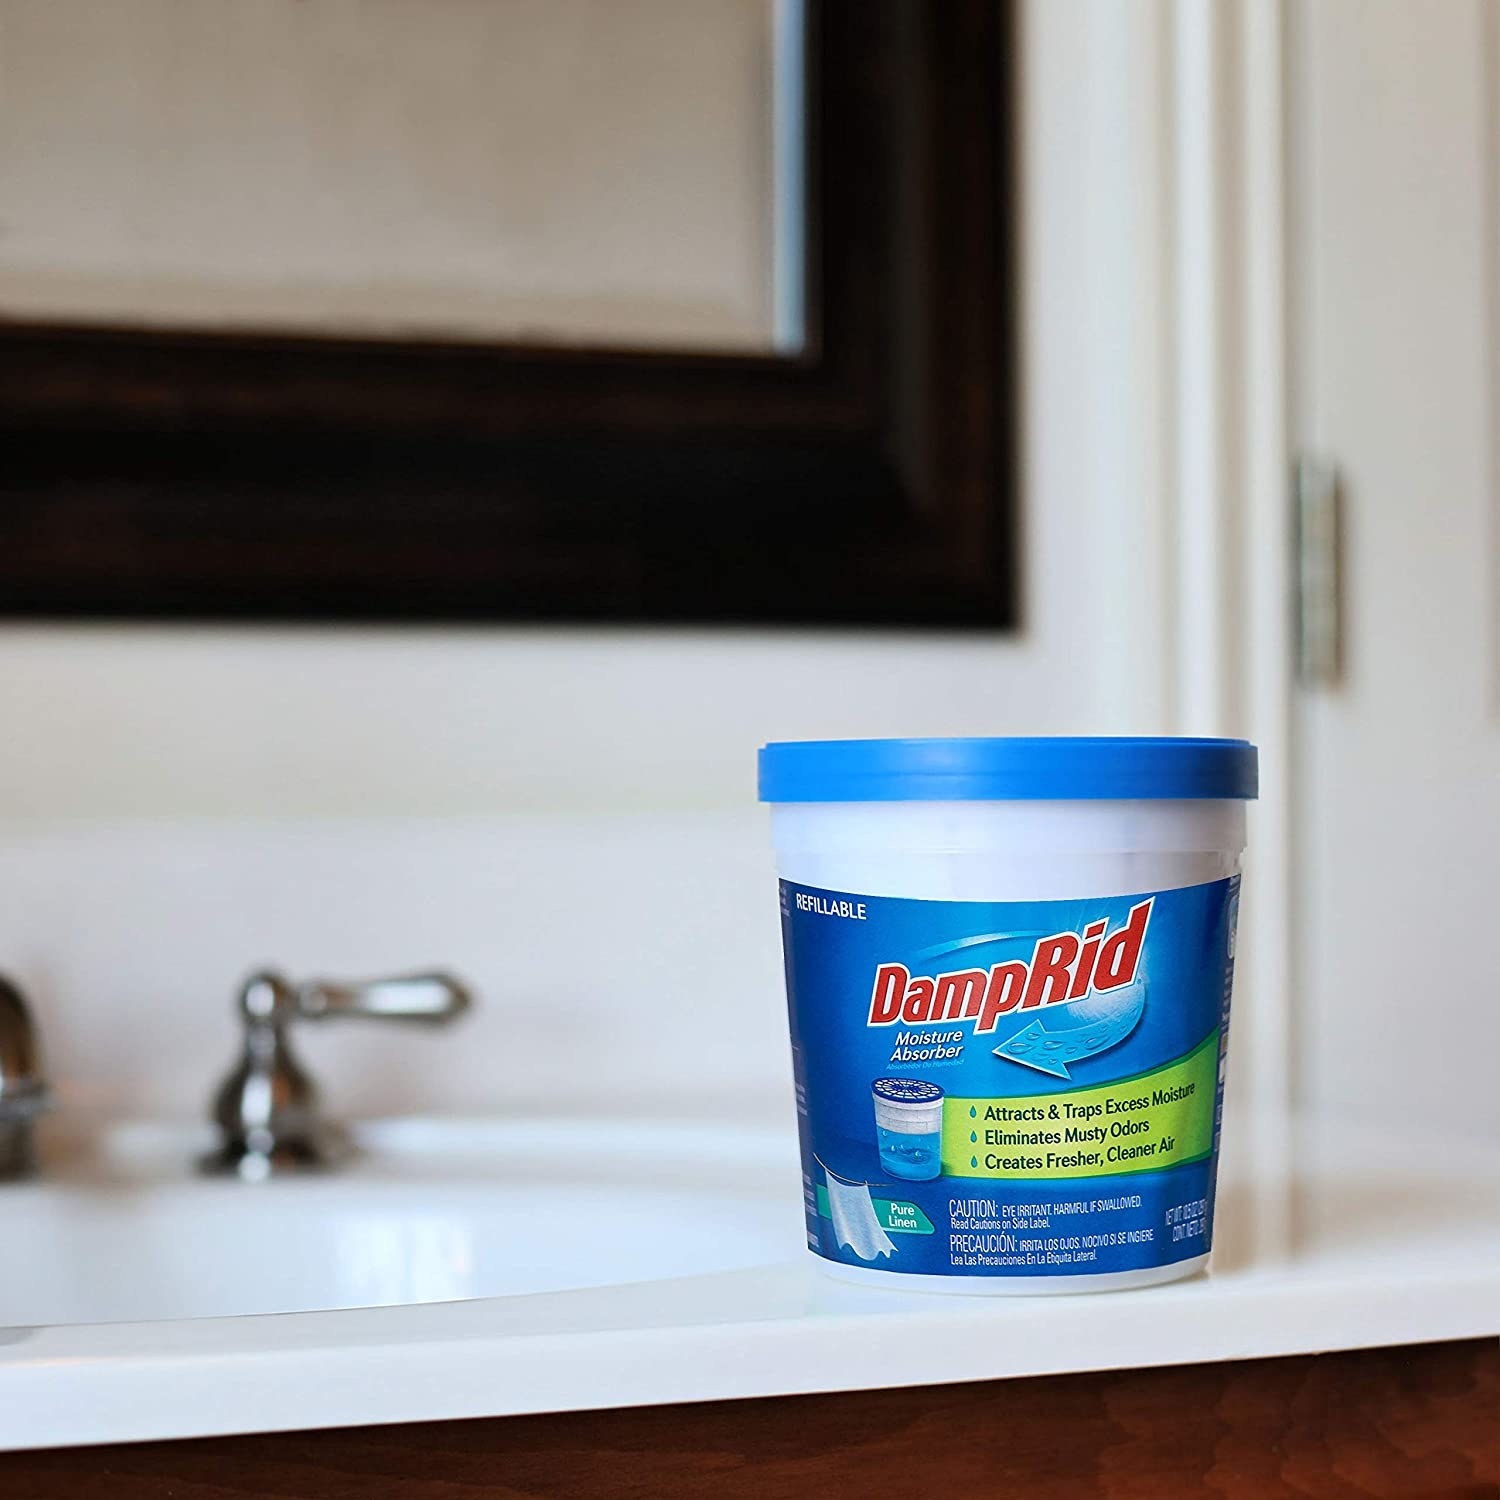 A tub of the product on a bathroom counter